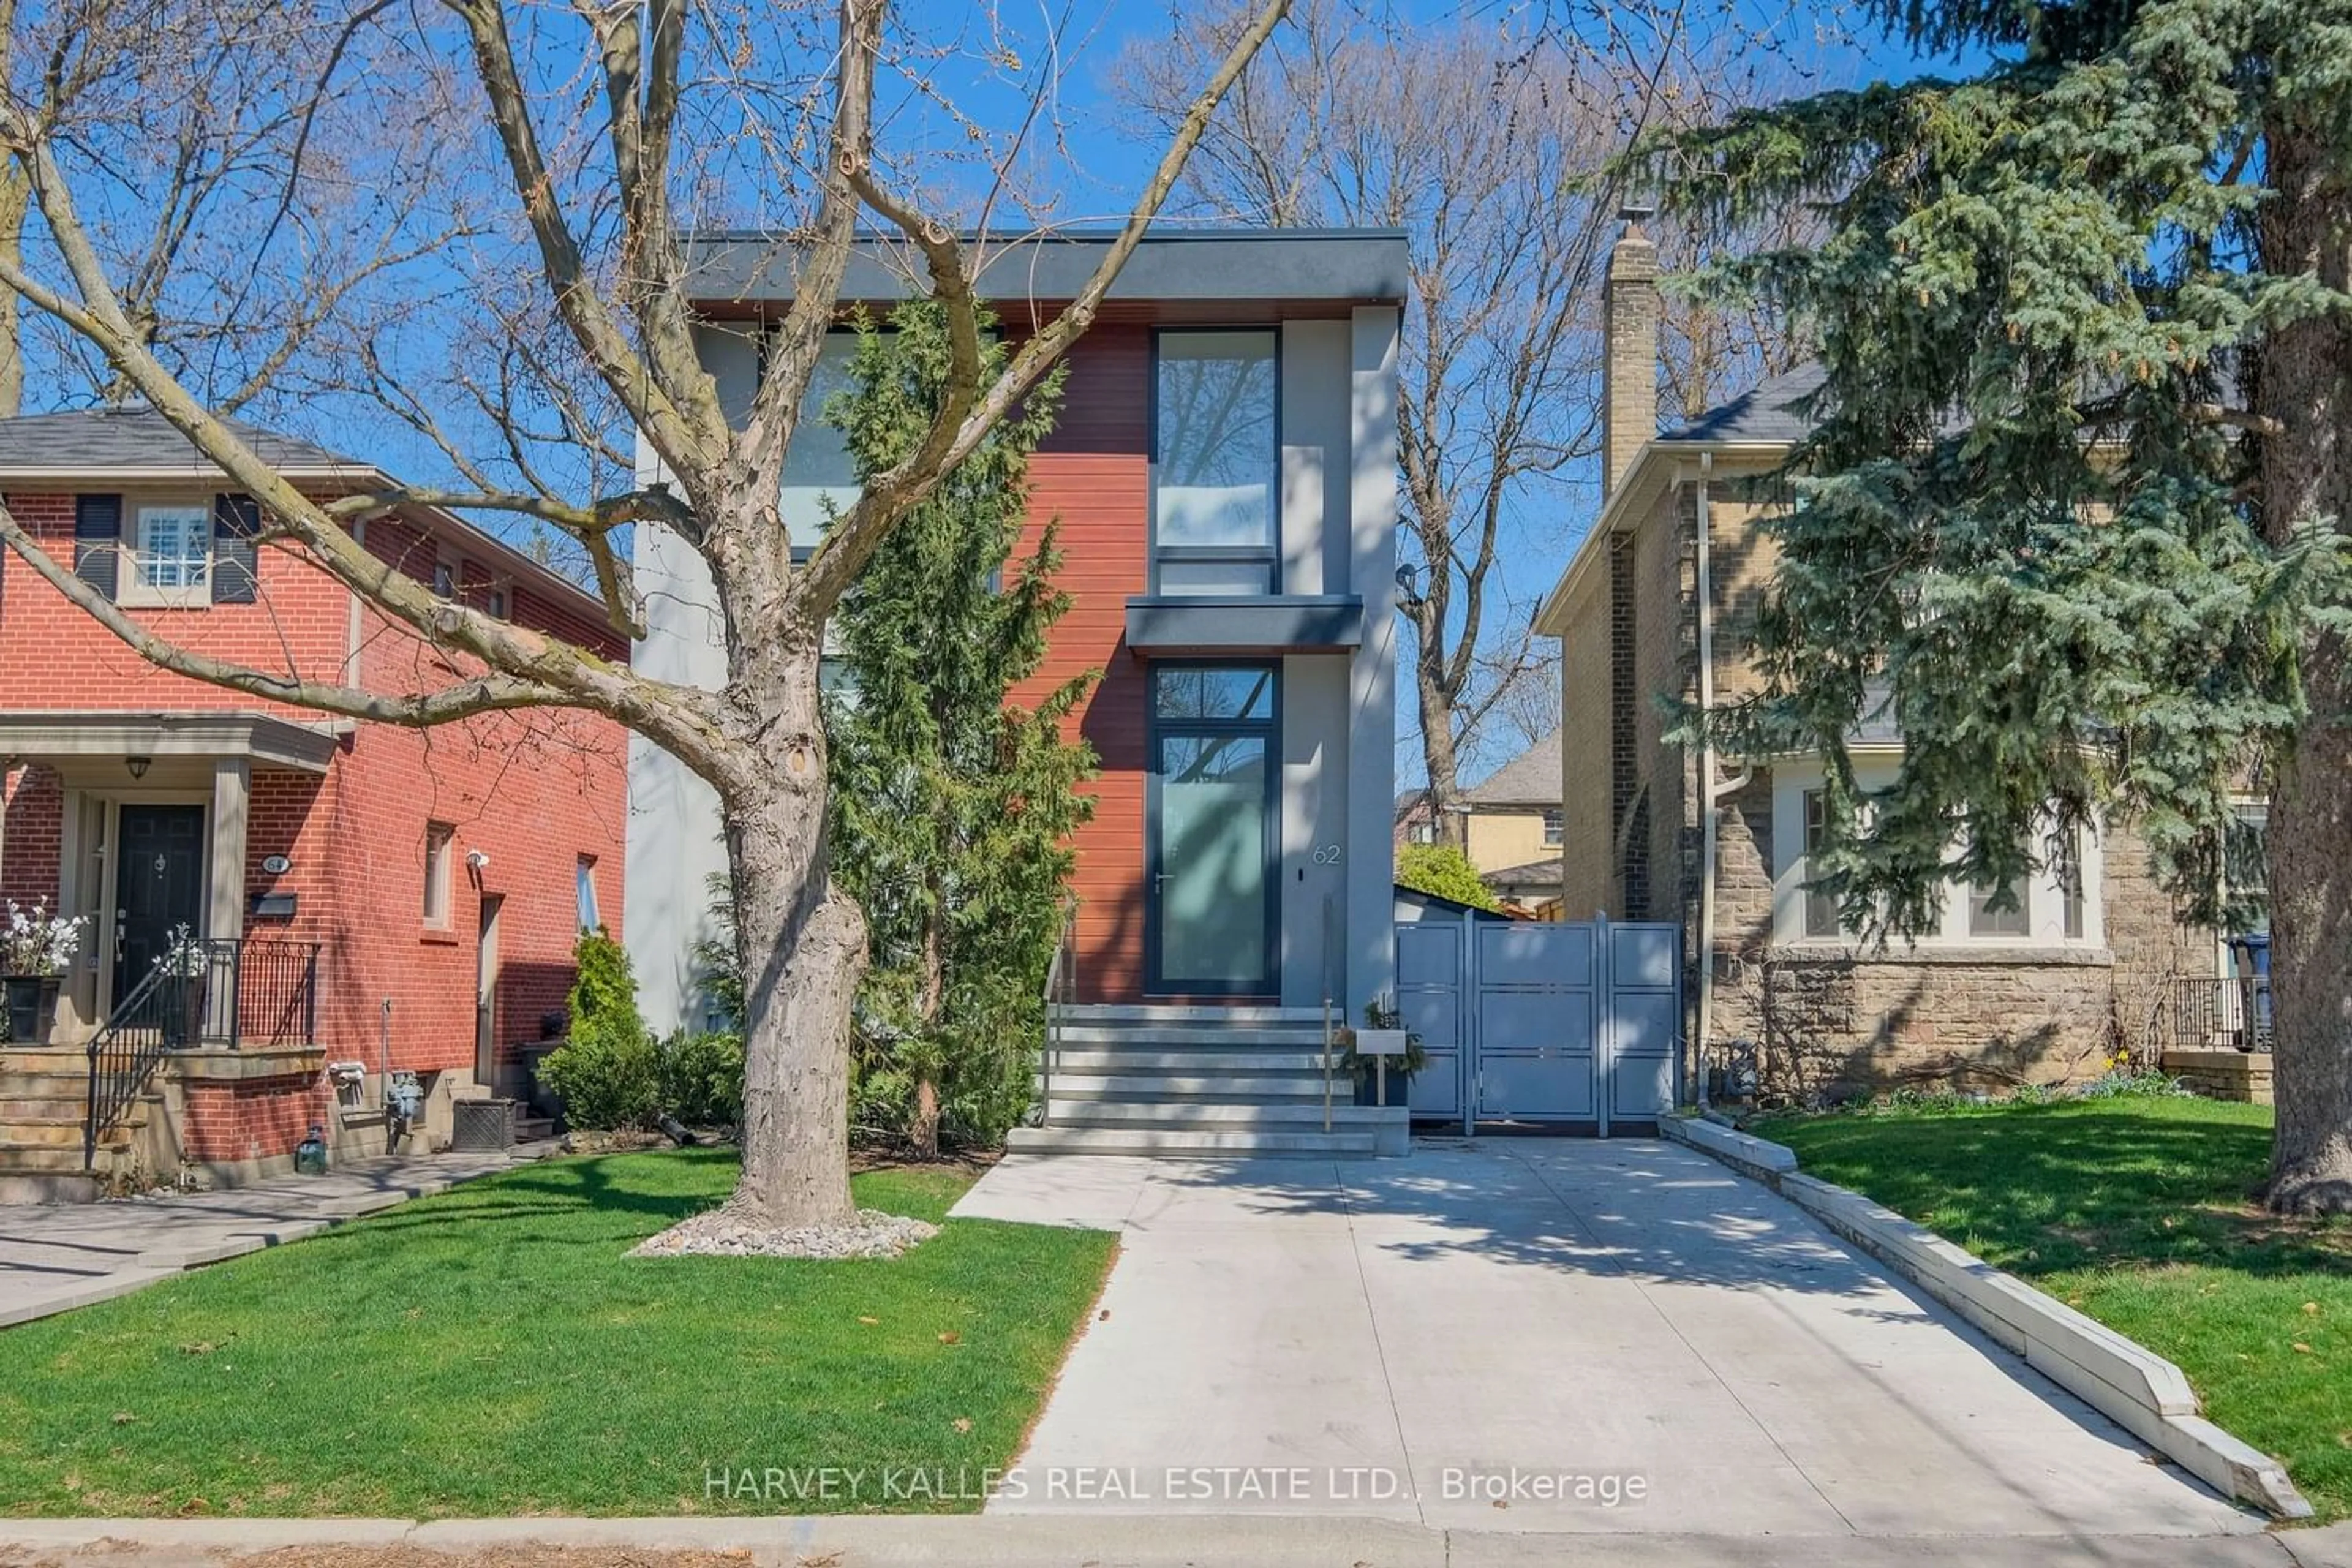 A pic from exterior of the house or condo for 62 Felbrigg Ave, Toronto Ontario M5M 2M1